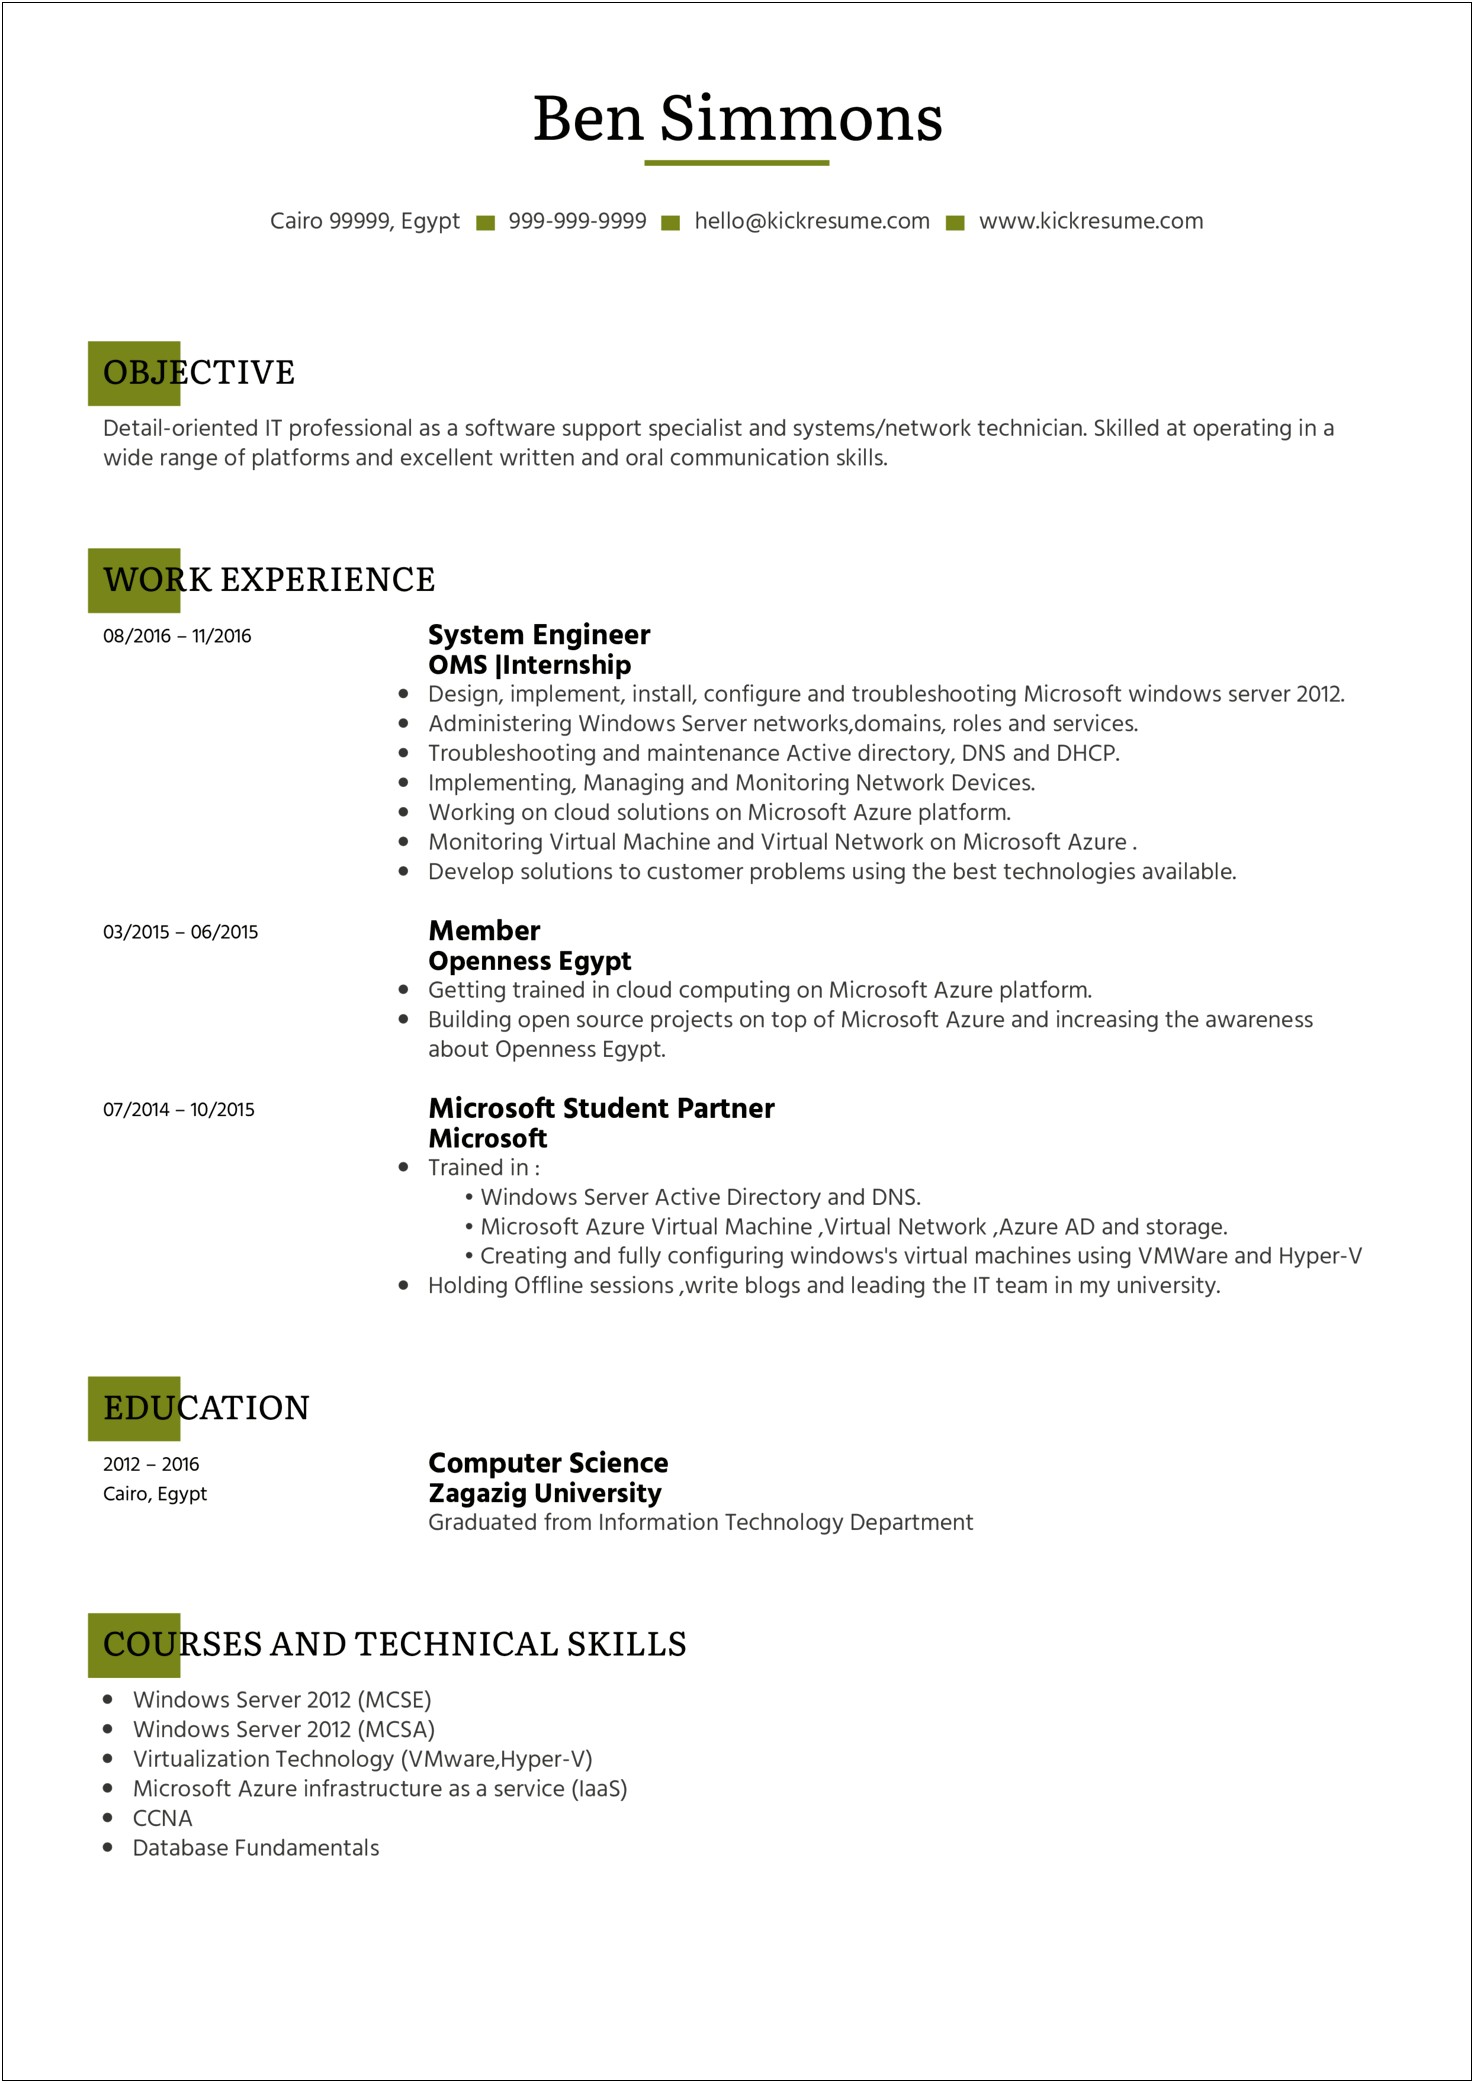 Resume For Cloud Administrator With 1 Year Experience